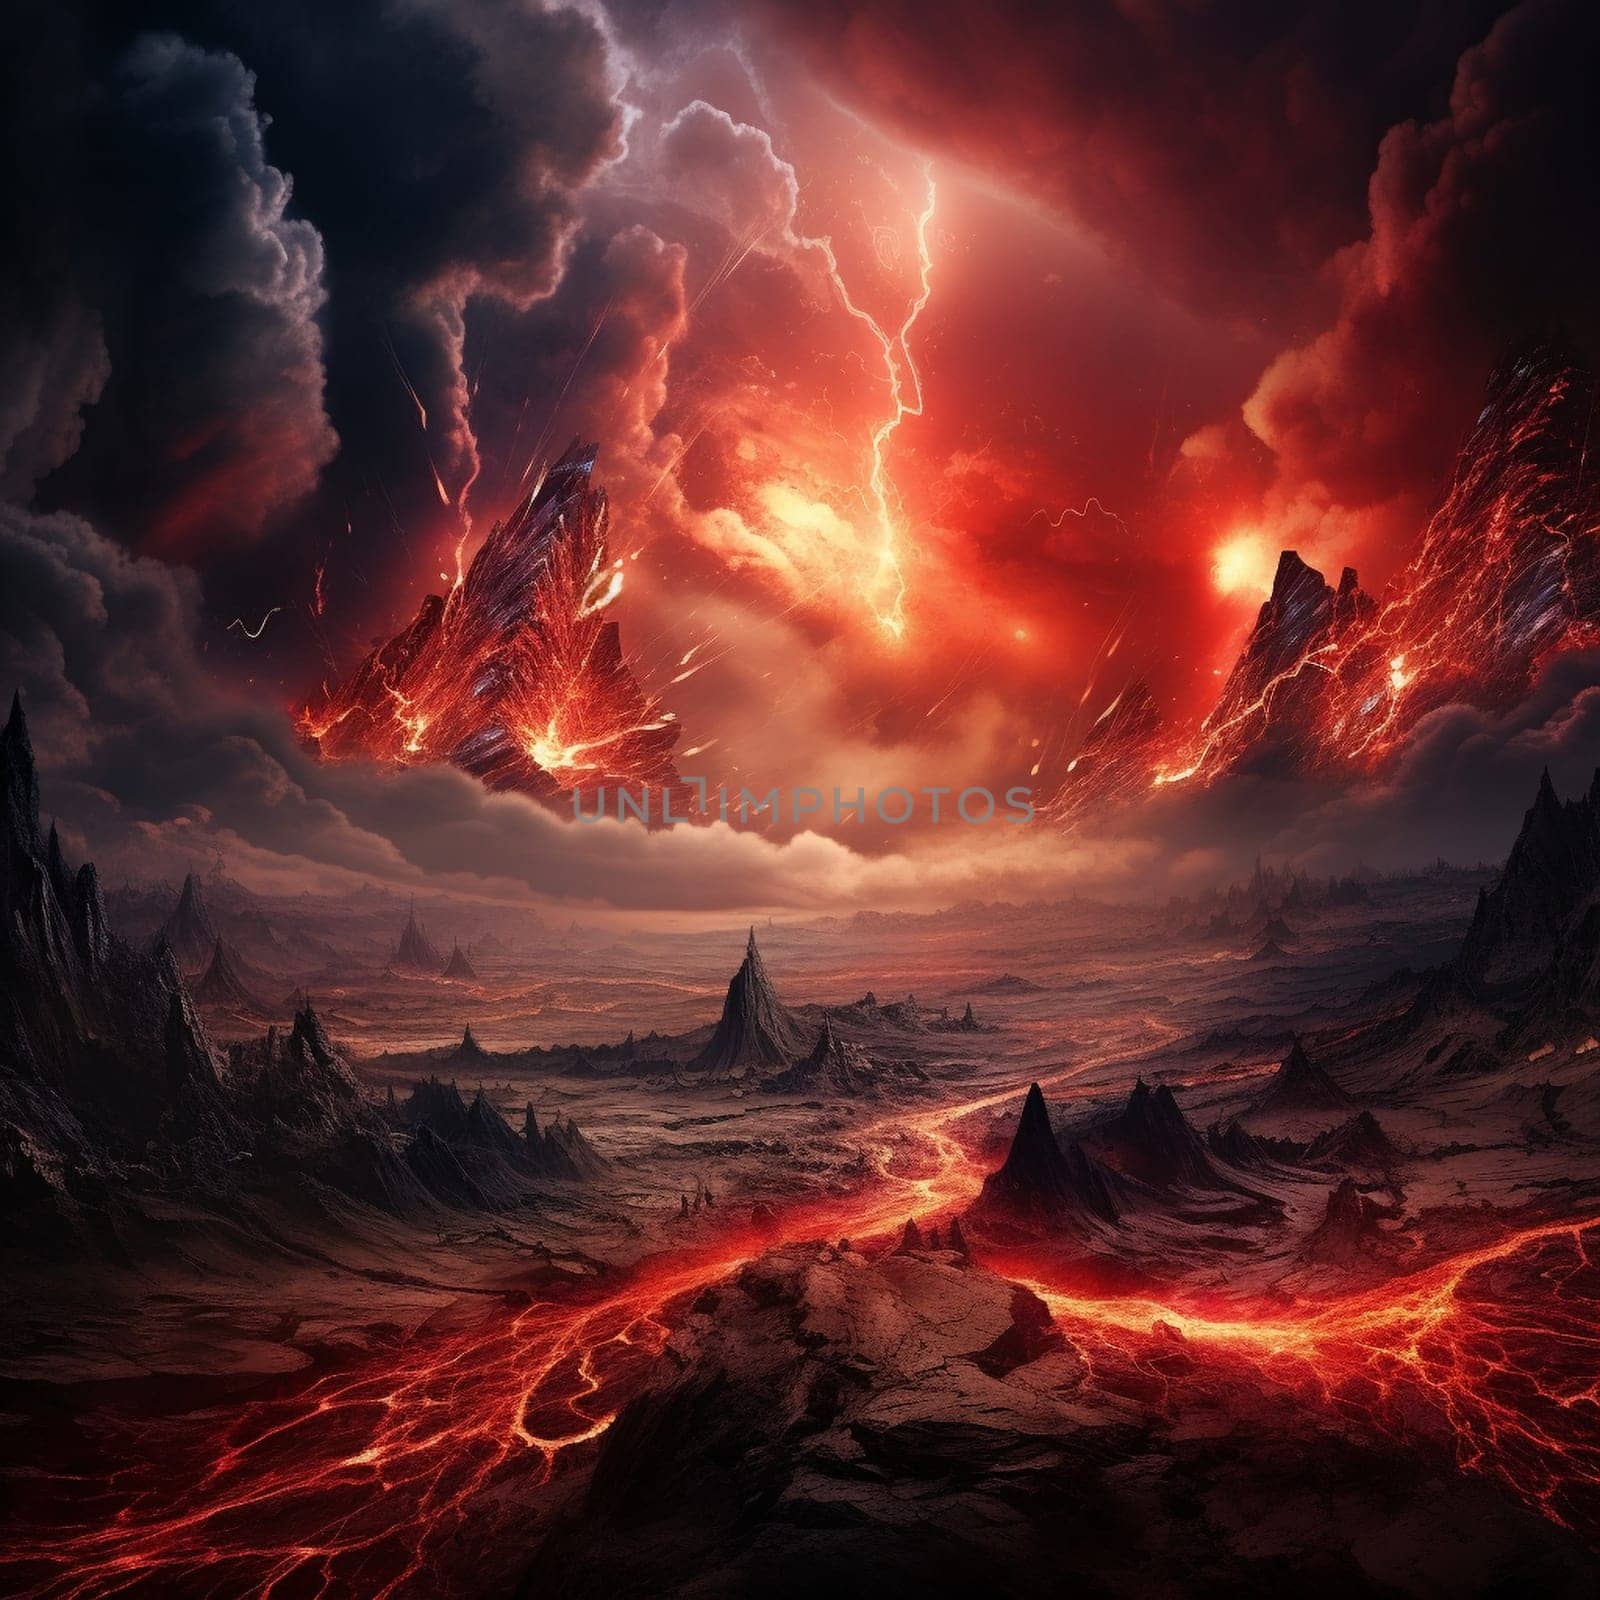 Immerse yourself in the captivating world of this surreal volcanic vortex engulfing a serene landscape. This artwork combines elements of both destruction and beauty, showcasing the raw power and intensity of the eruption. The vibrant and dynamic art style invites viewers to witness the chaos and turmoil of nature, while maintaining an artistic appeal that makes it perfect for microstock sites and attracting potential buyers.